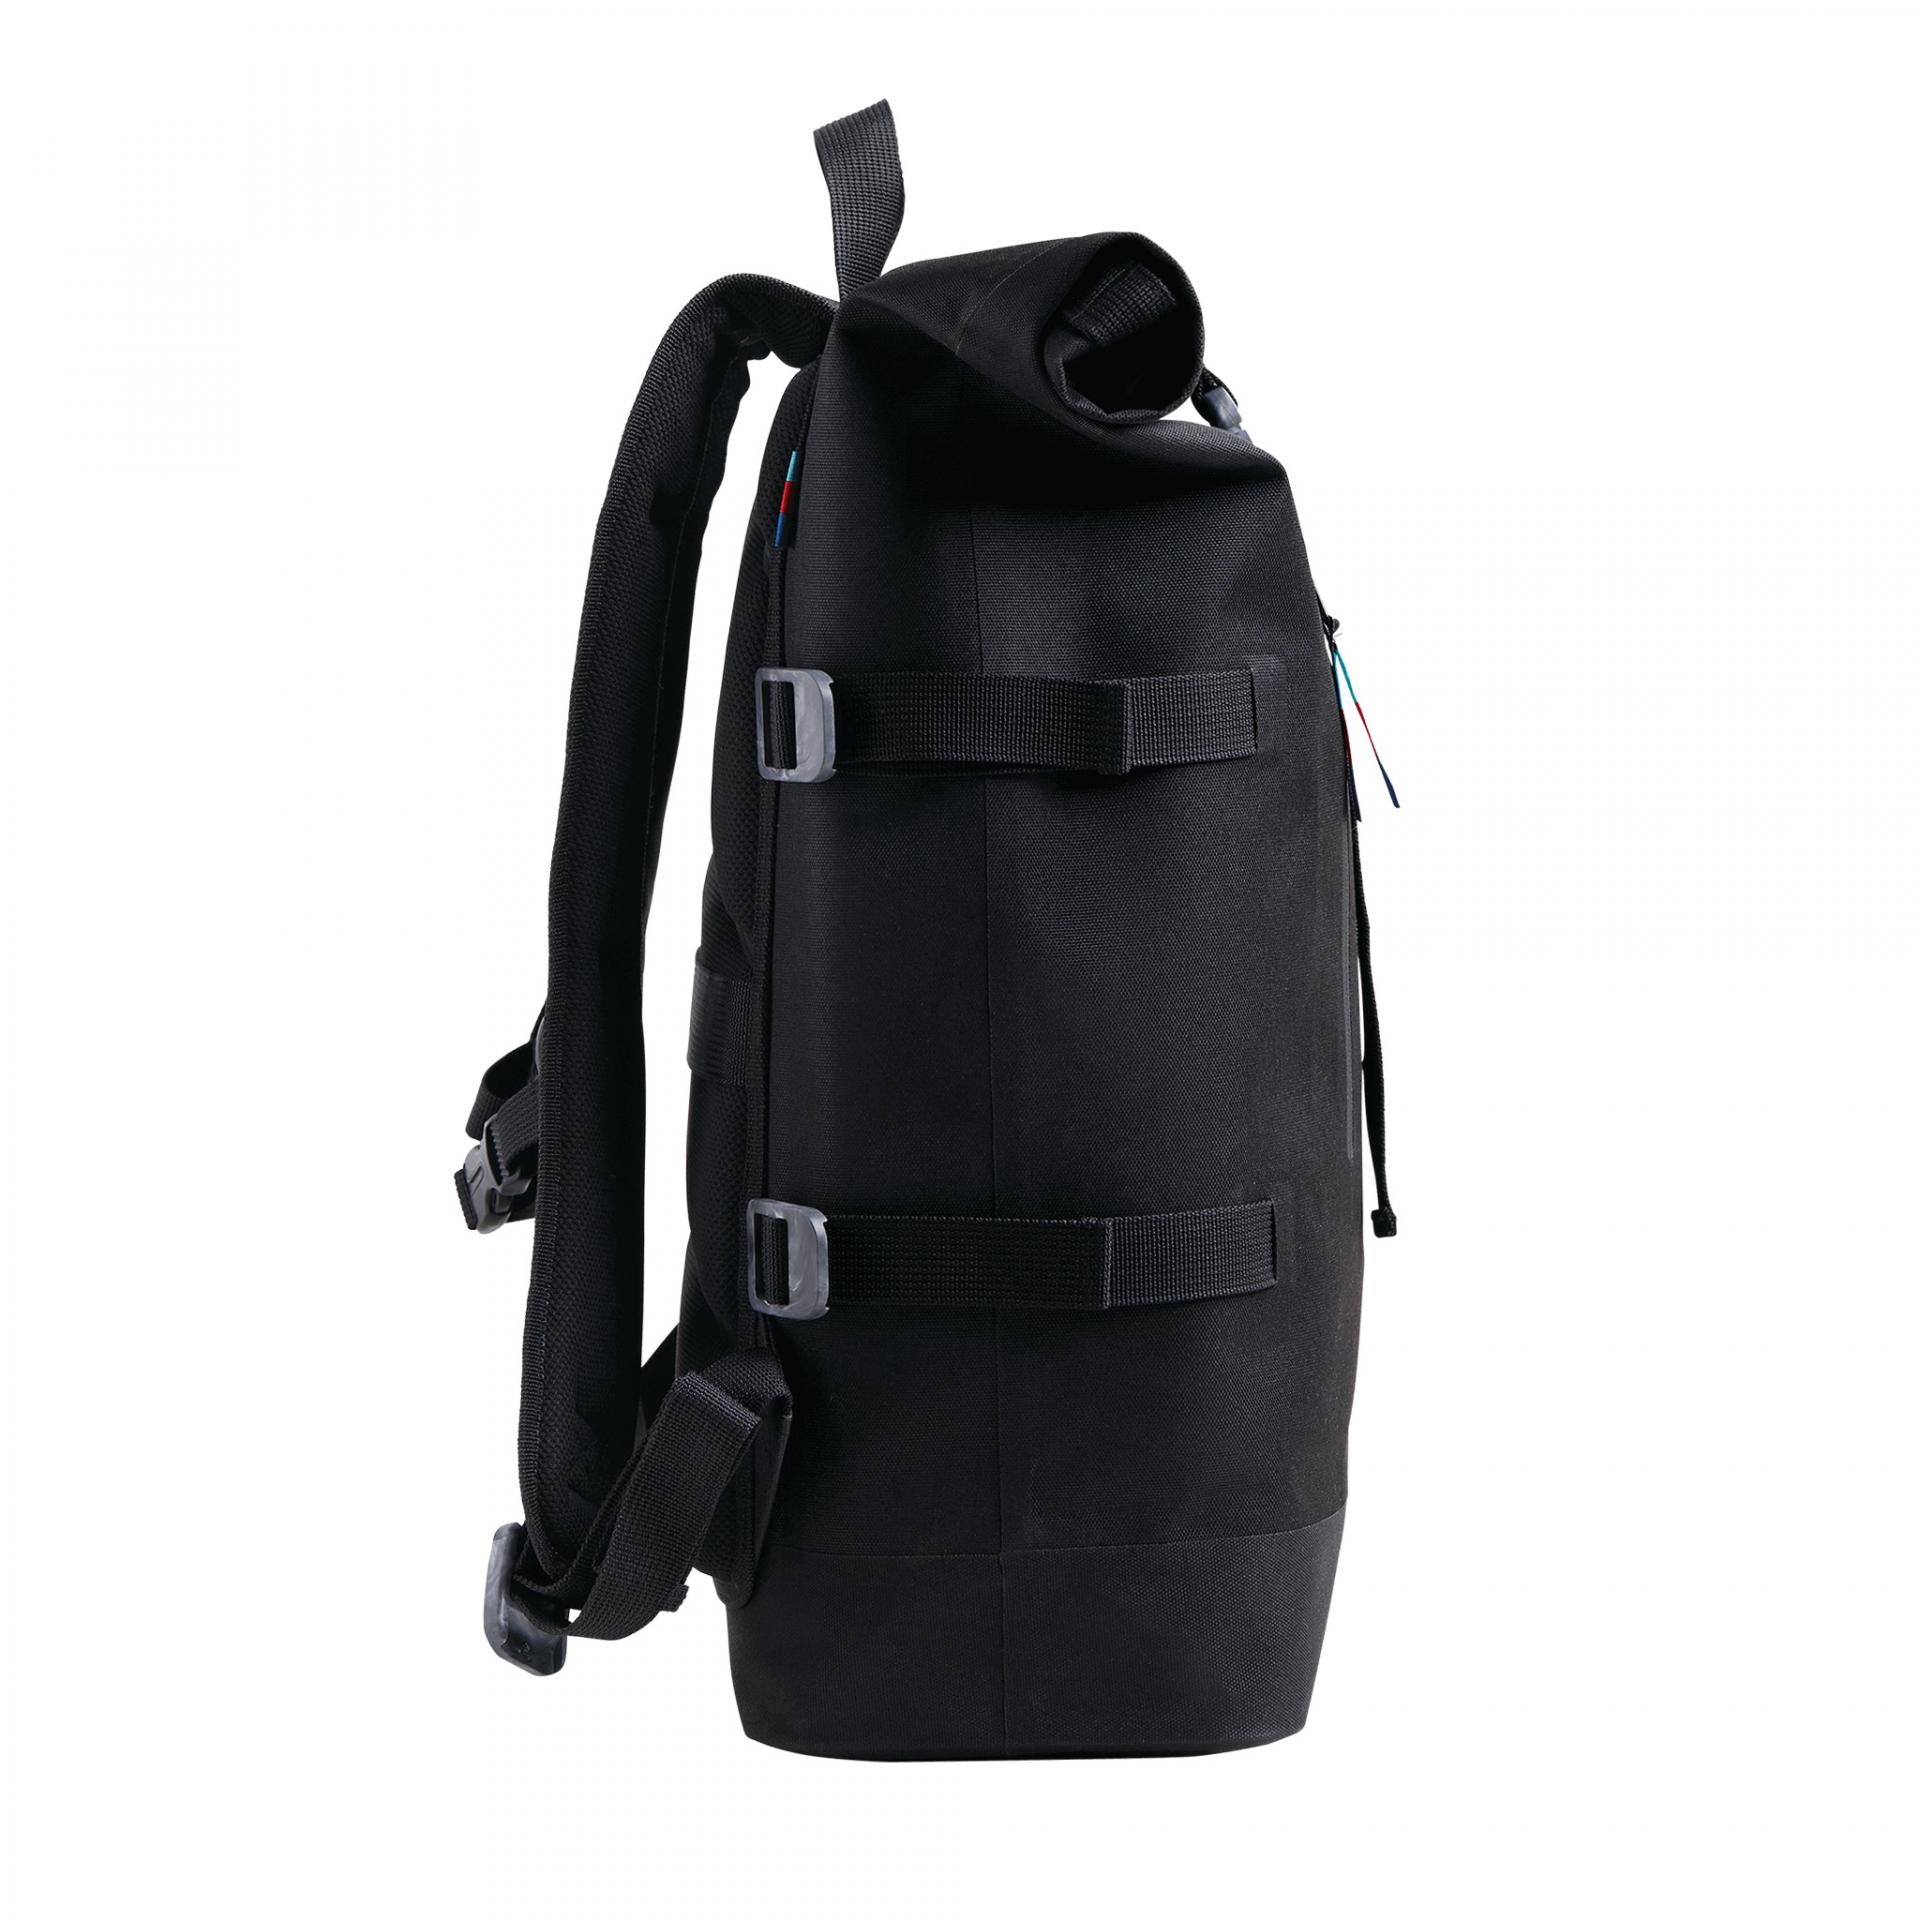 Got Bag Rolltop Holy Poly Black Limited Edition